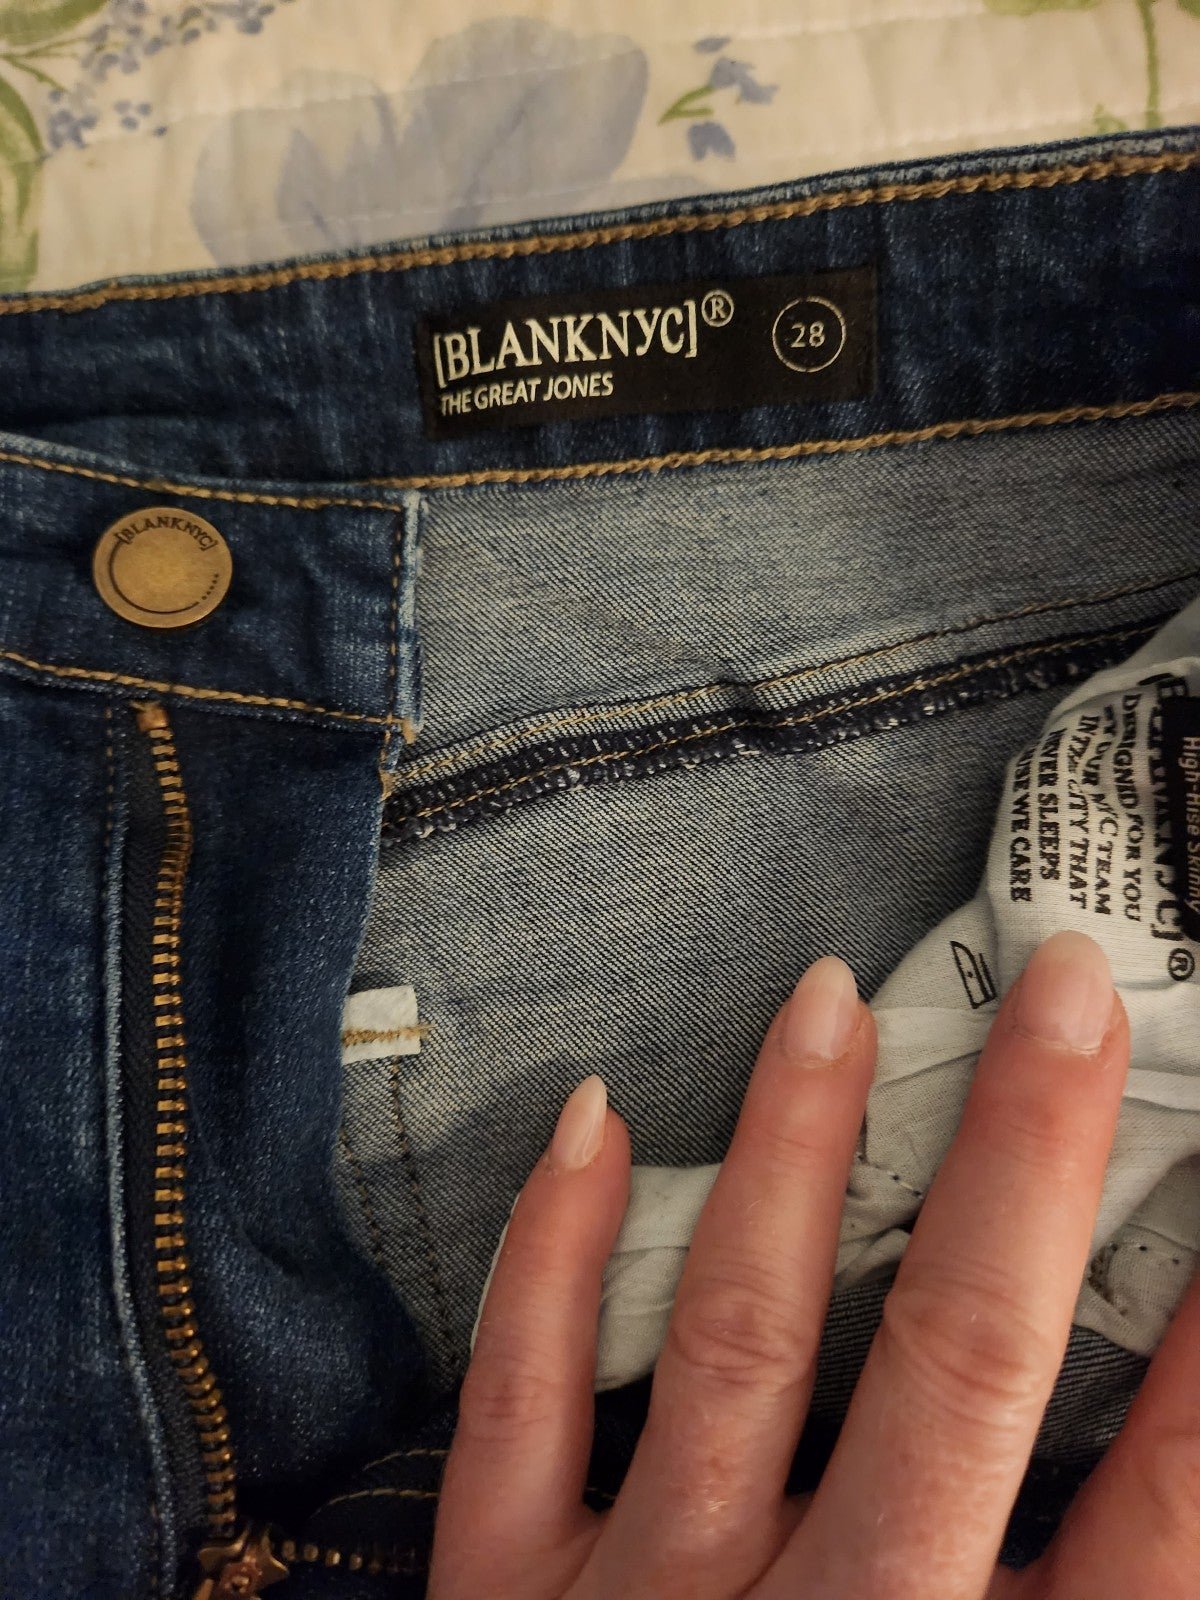 Fashion Blank NYC jeans hVOVUsvpe just buy it